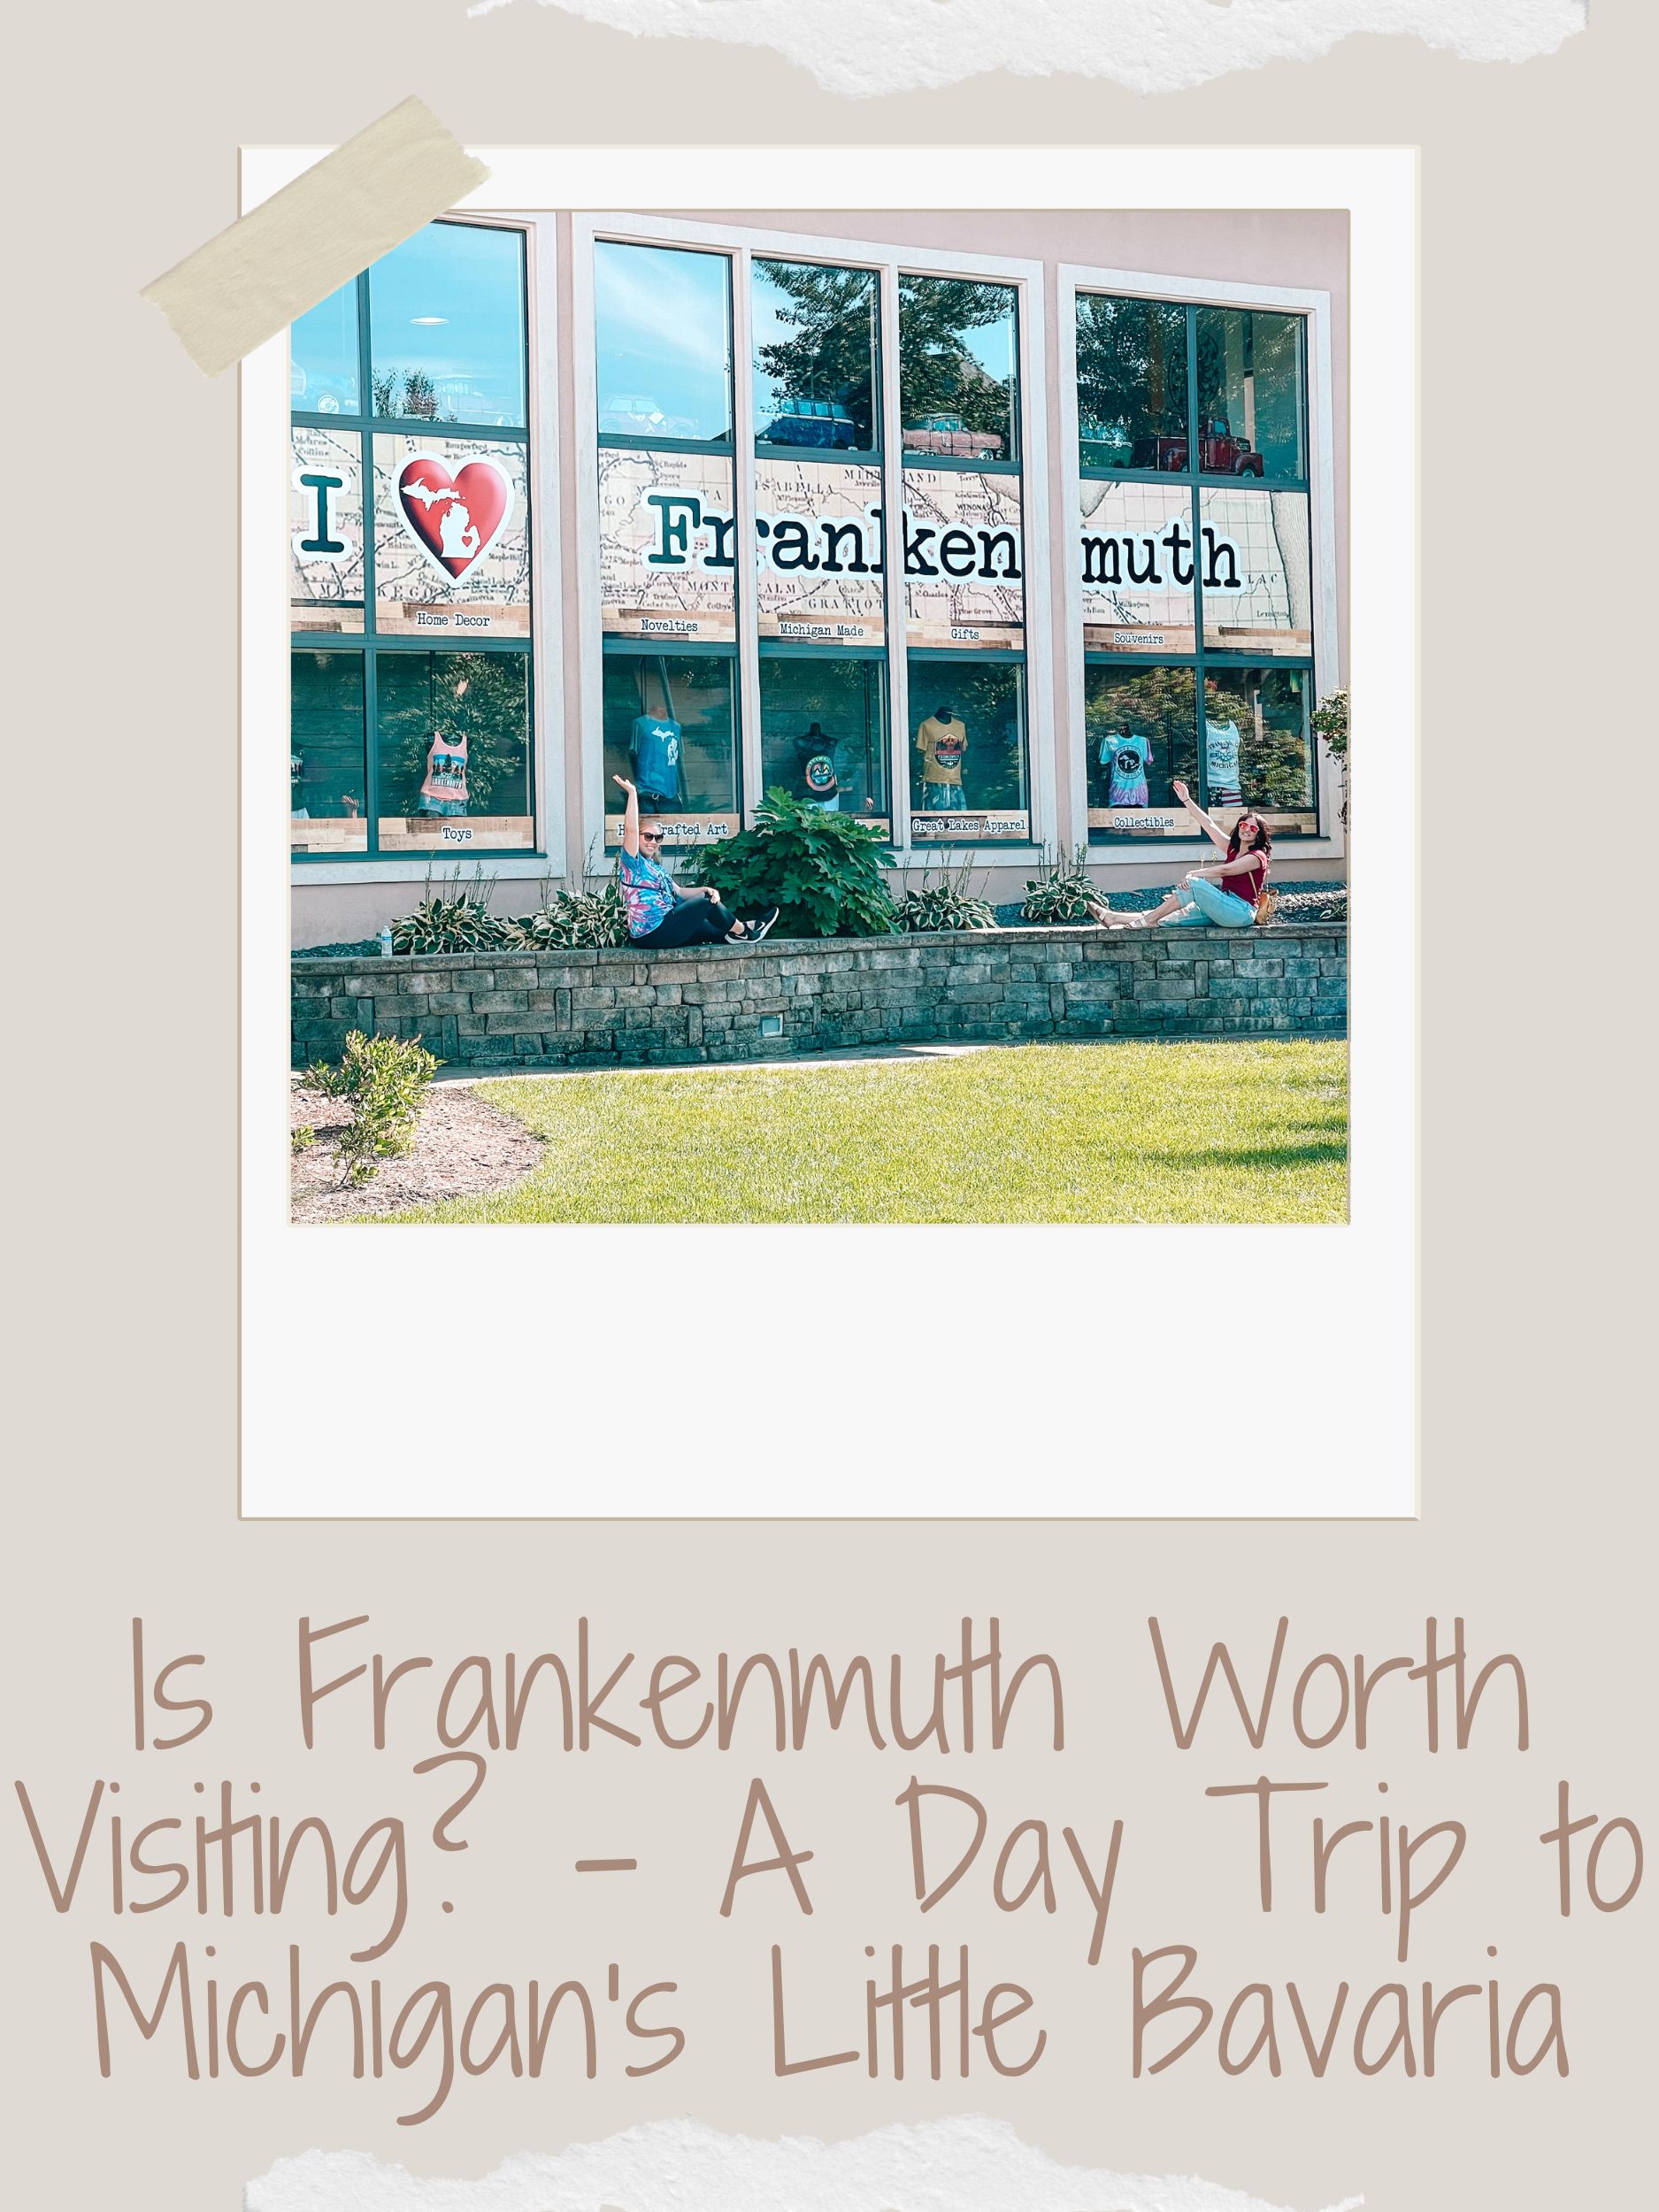 Is Frankenmuth Worth Visiting? A Day Trip to Michigan’s Little Bavaria